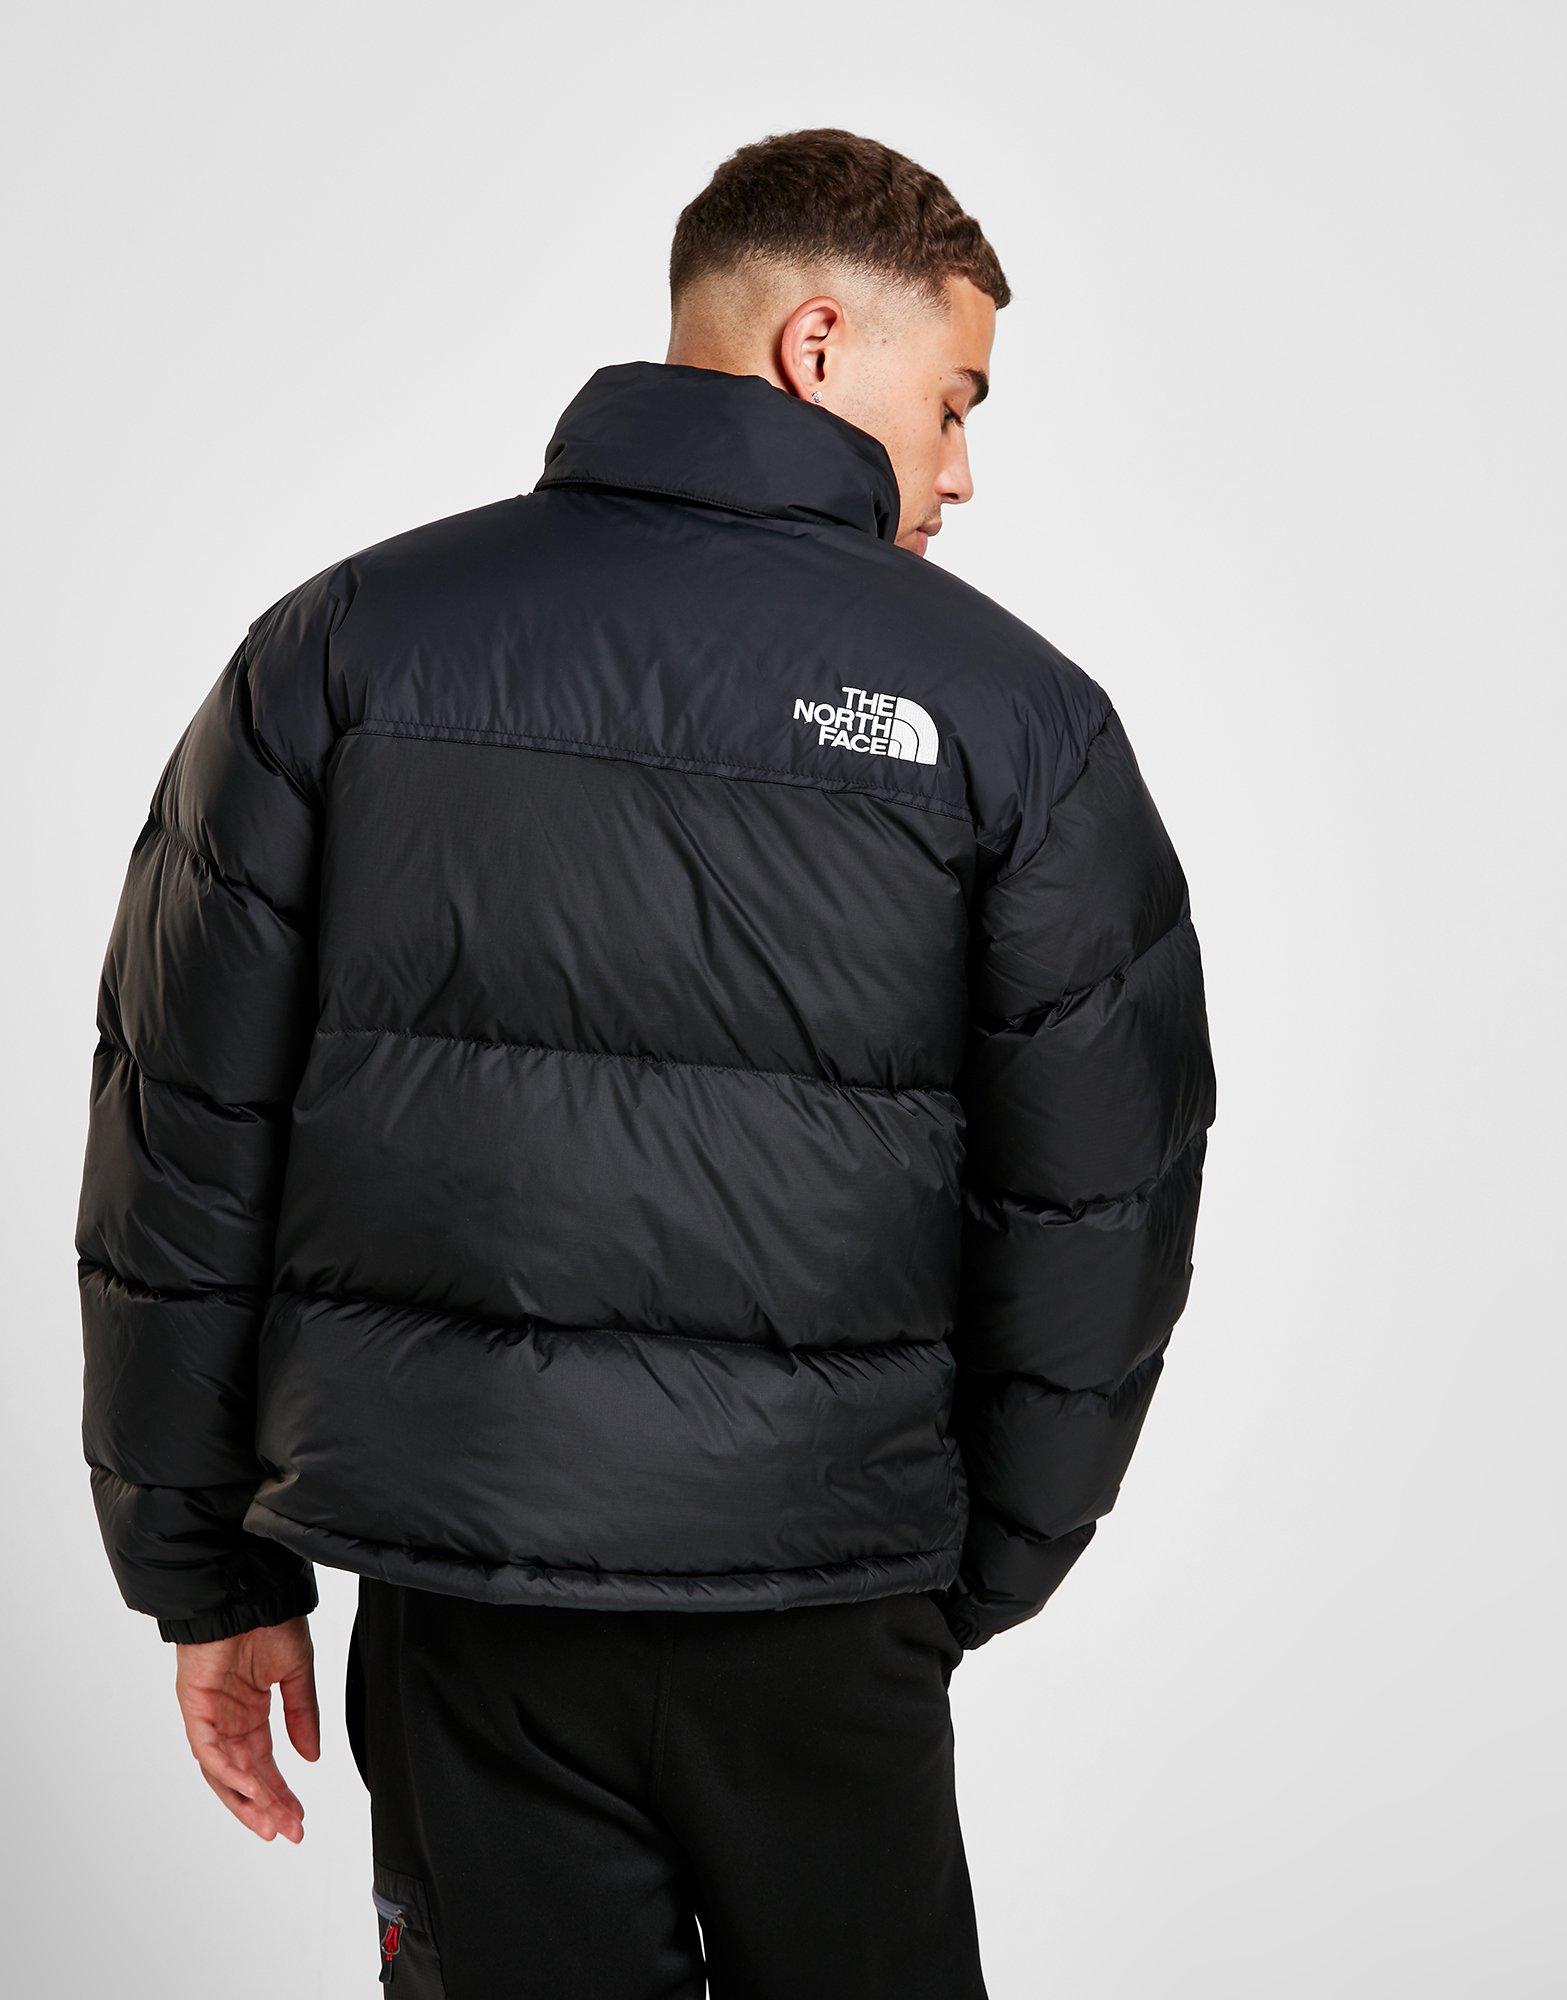 northern face down jacket